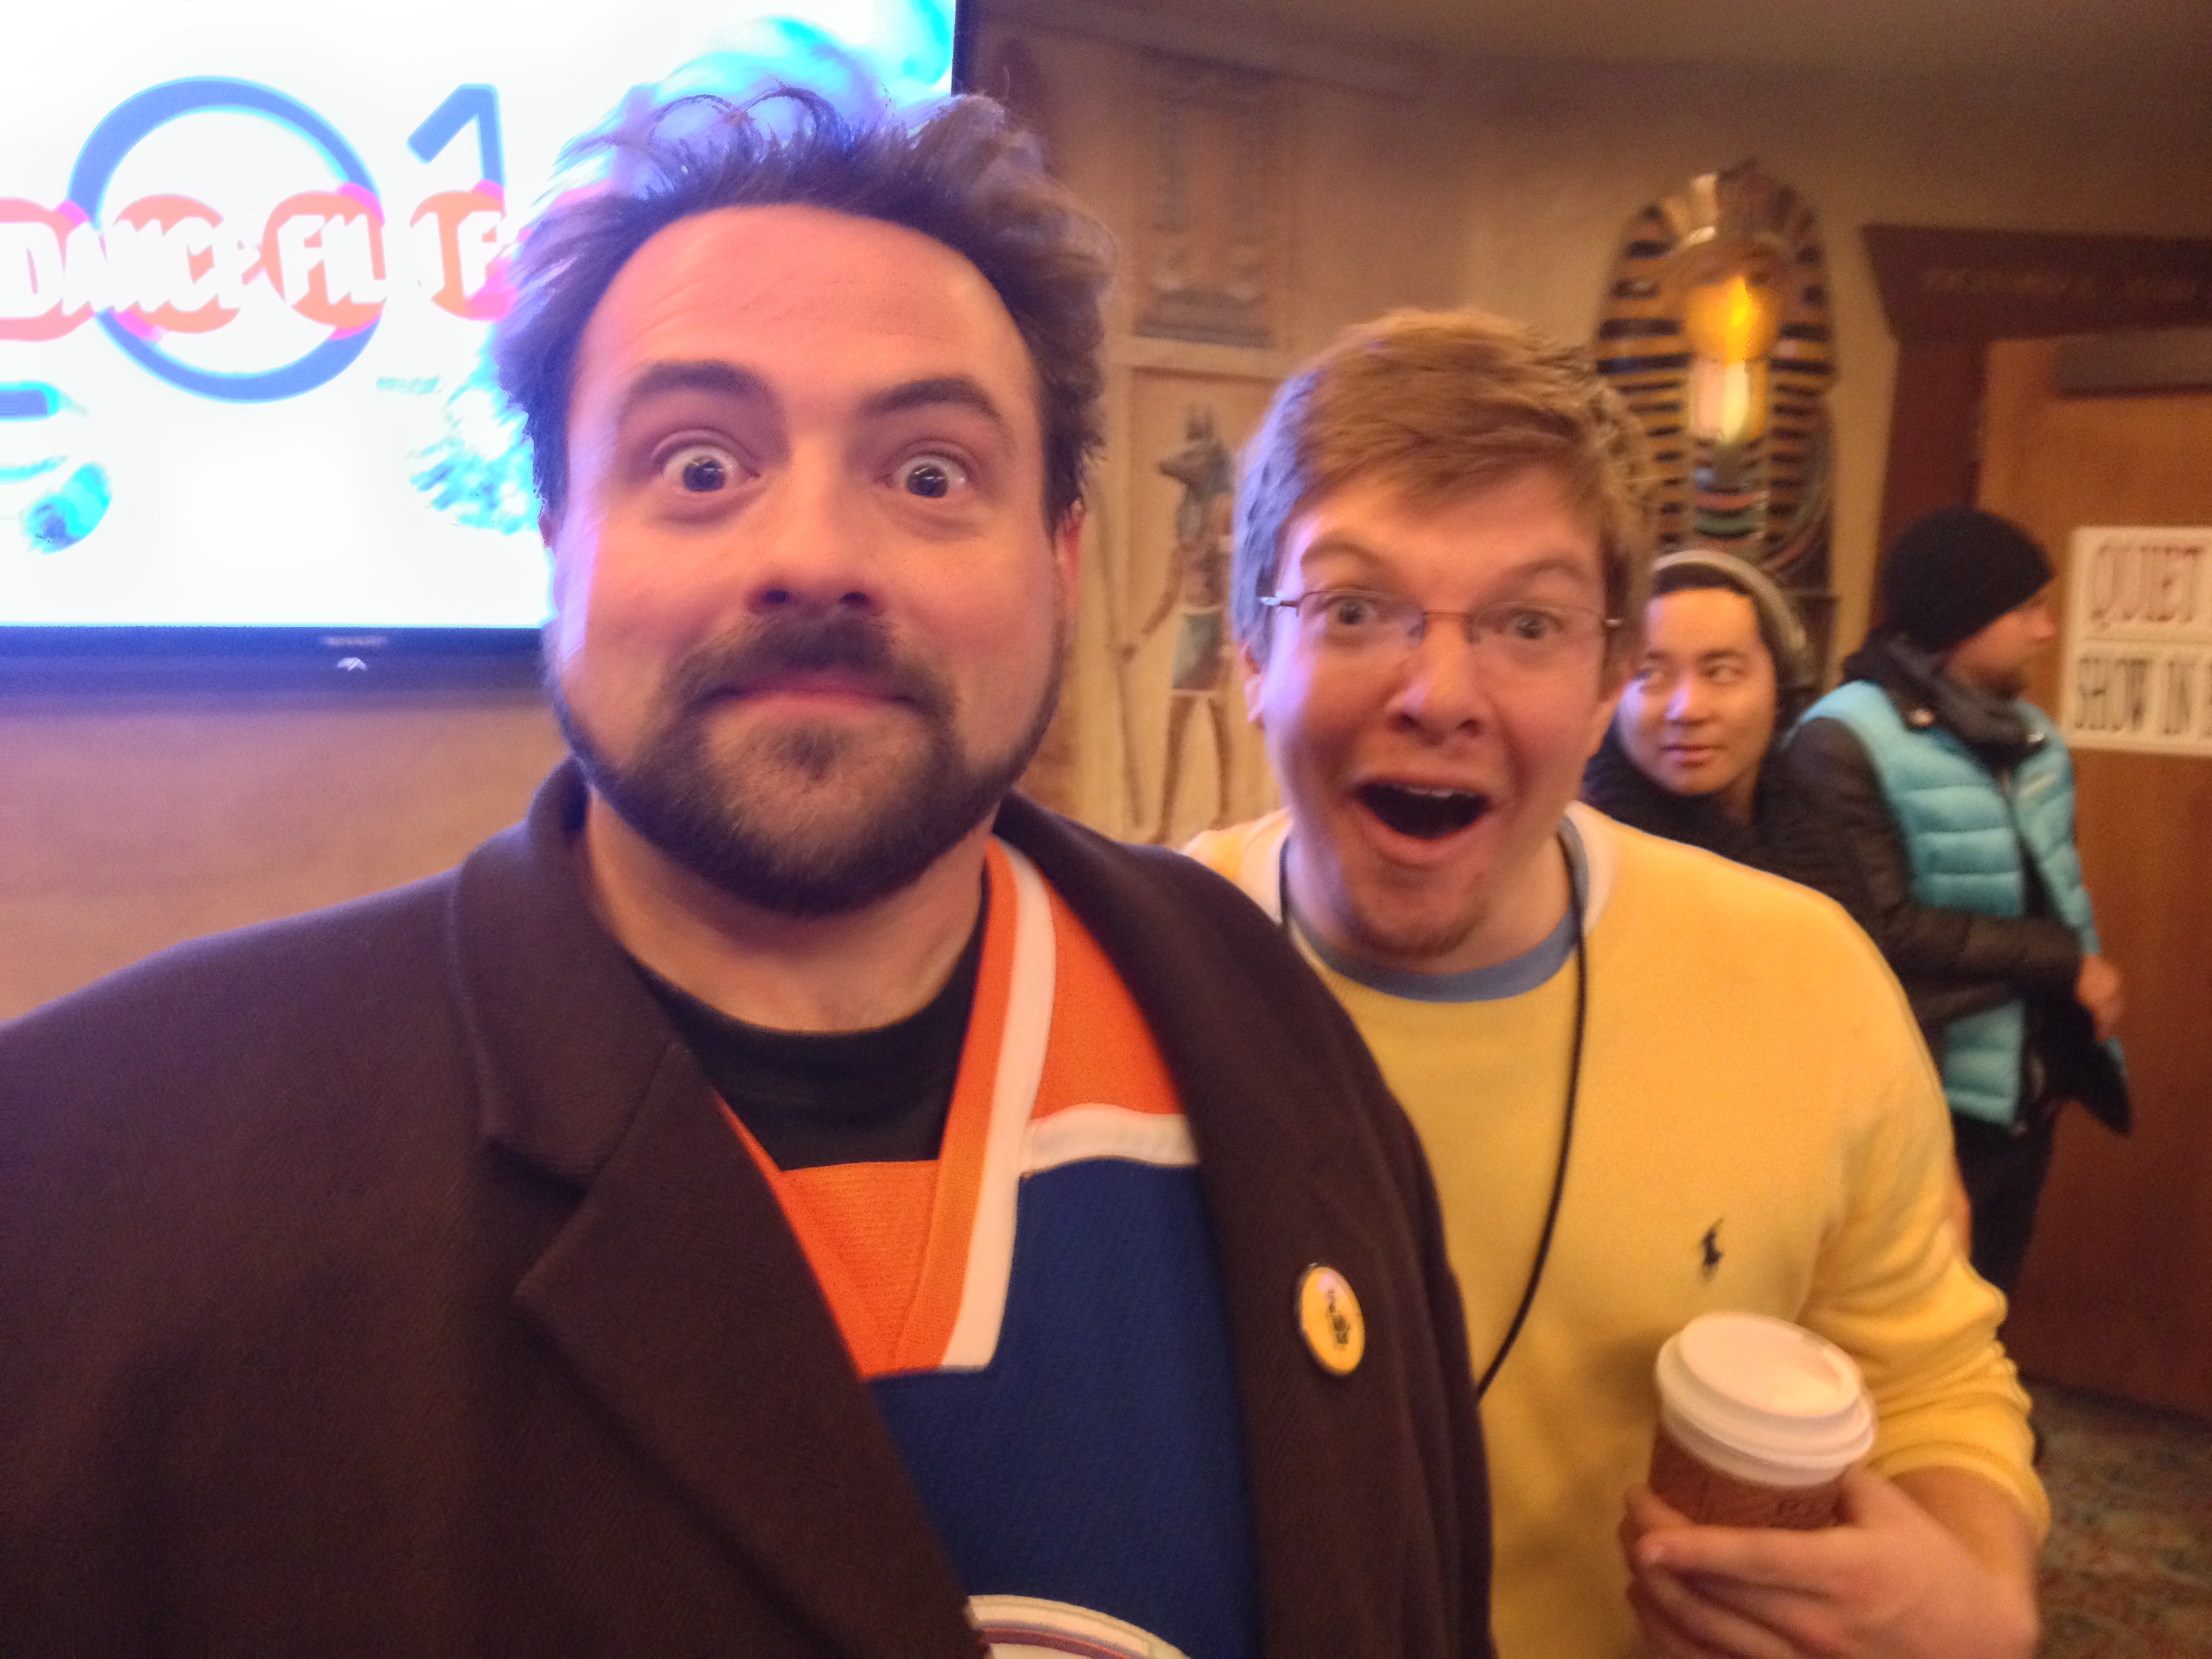 Cameron Scott Nadler with Kevin Smith at the Sundance Film Festival 2014.